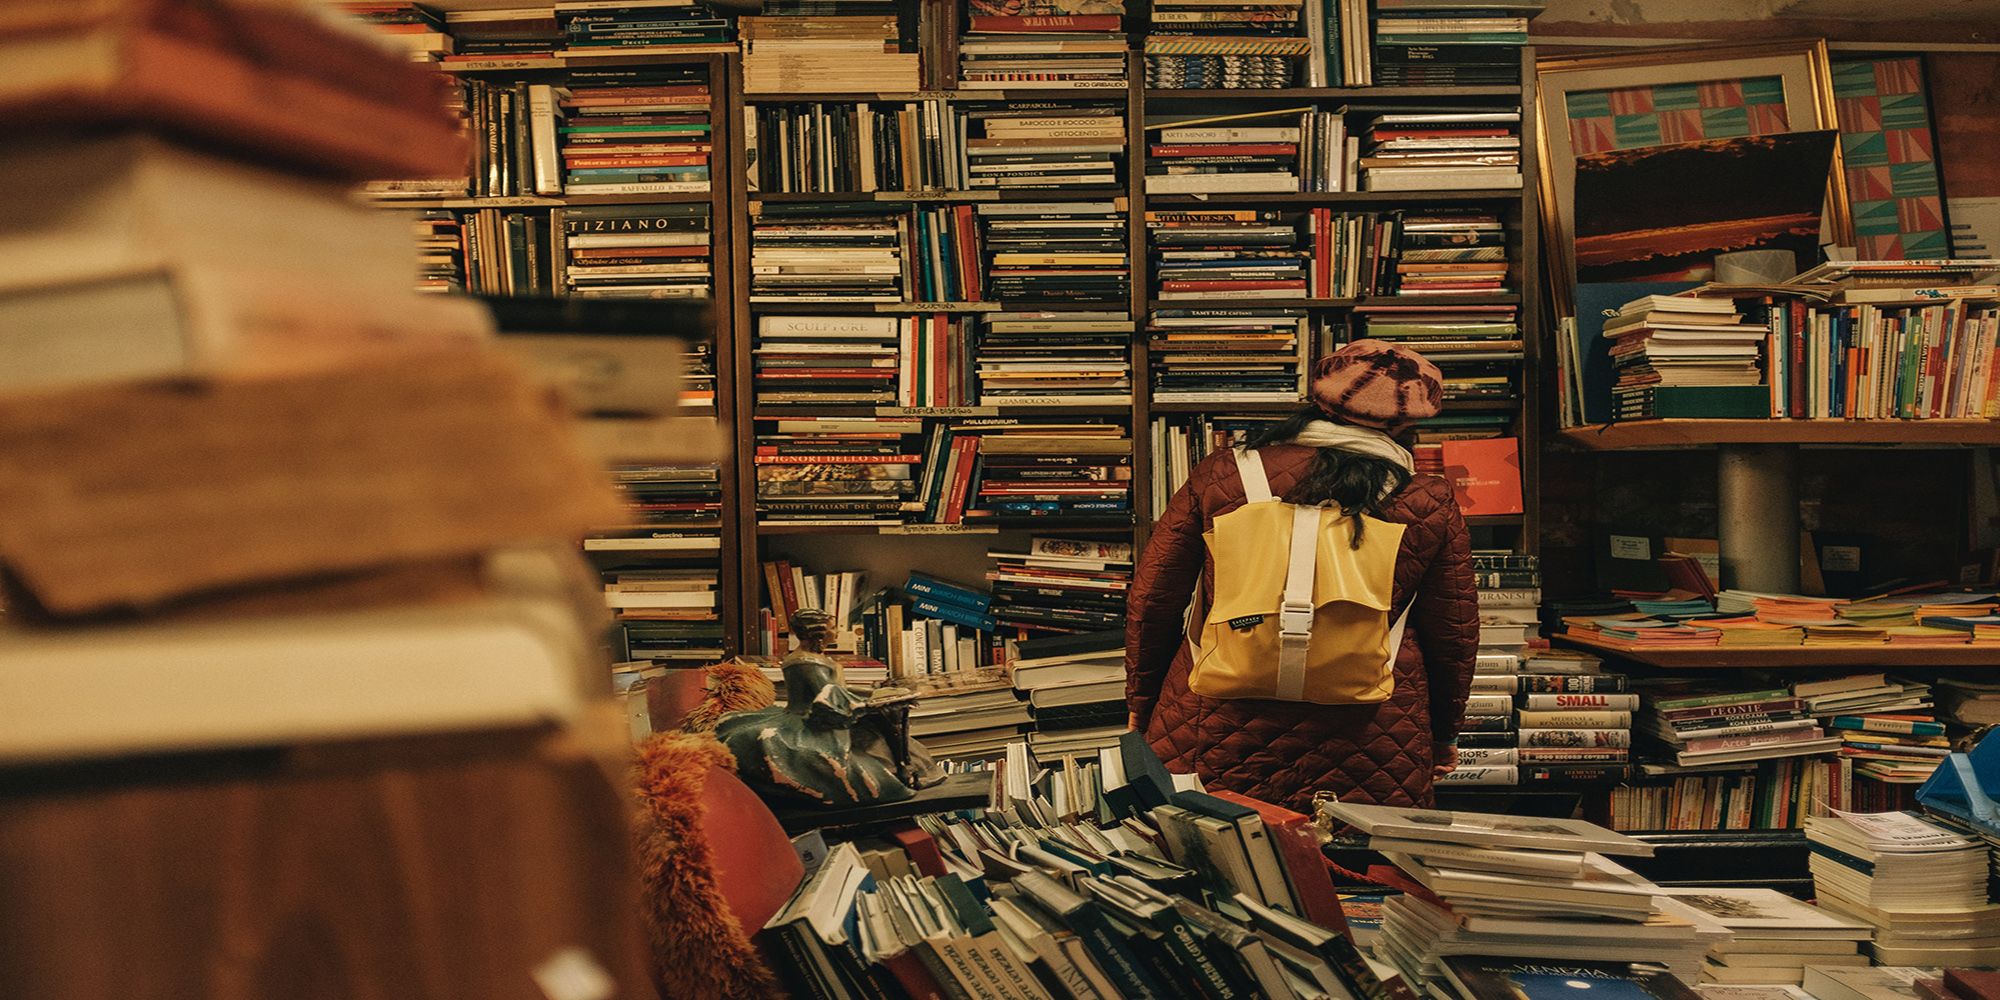 Woman looks through various shelves of a Venice, Italy library. Photo by Darwin Vegher via Unsplash.com.